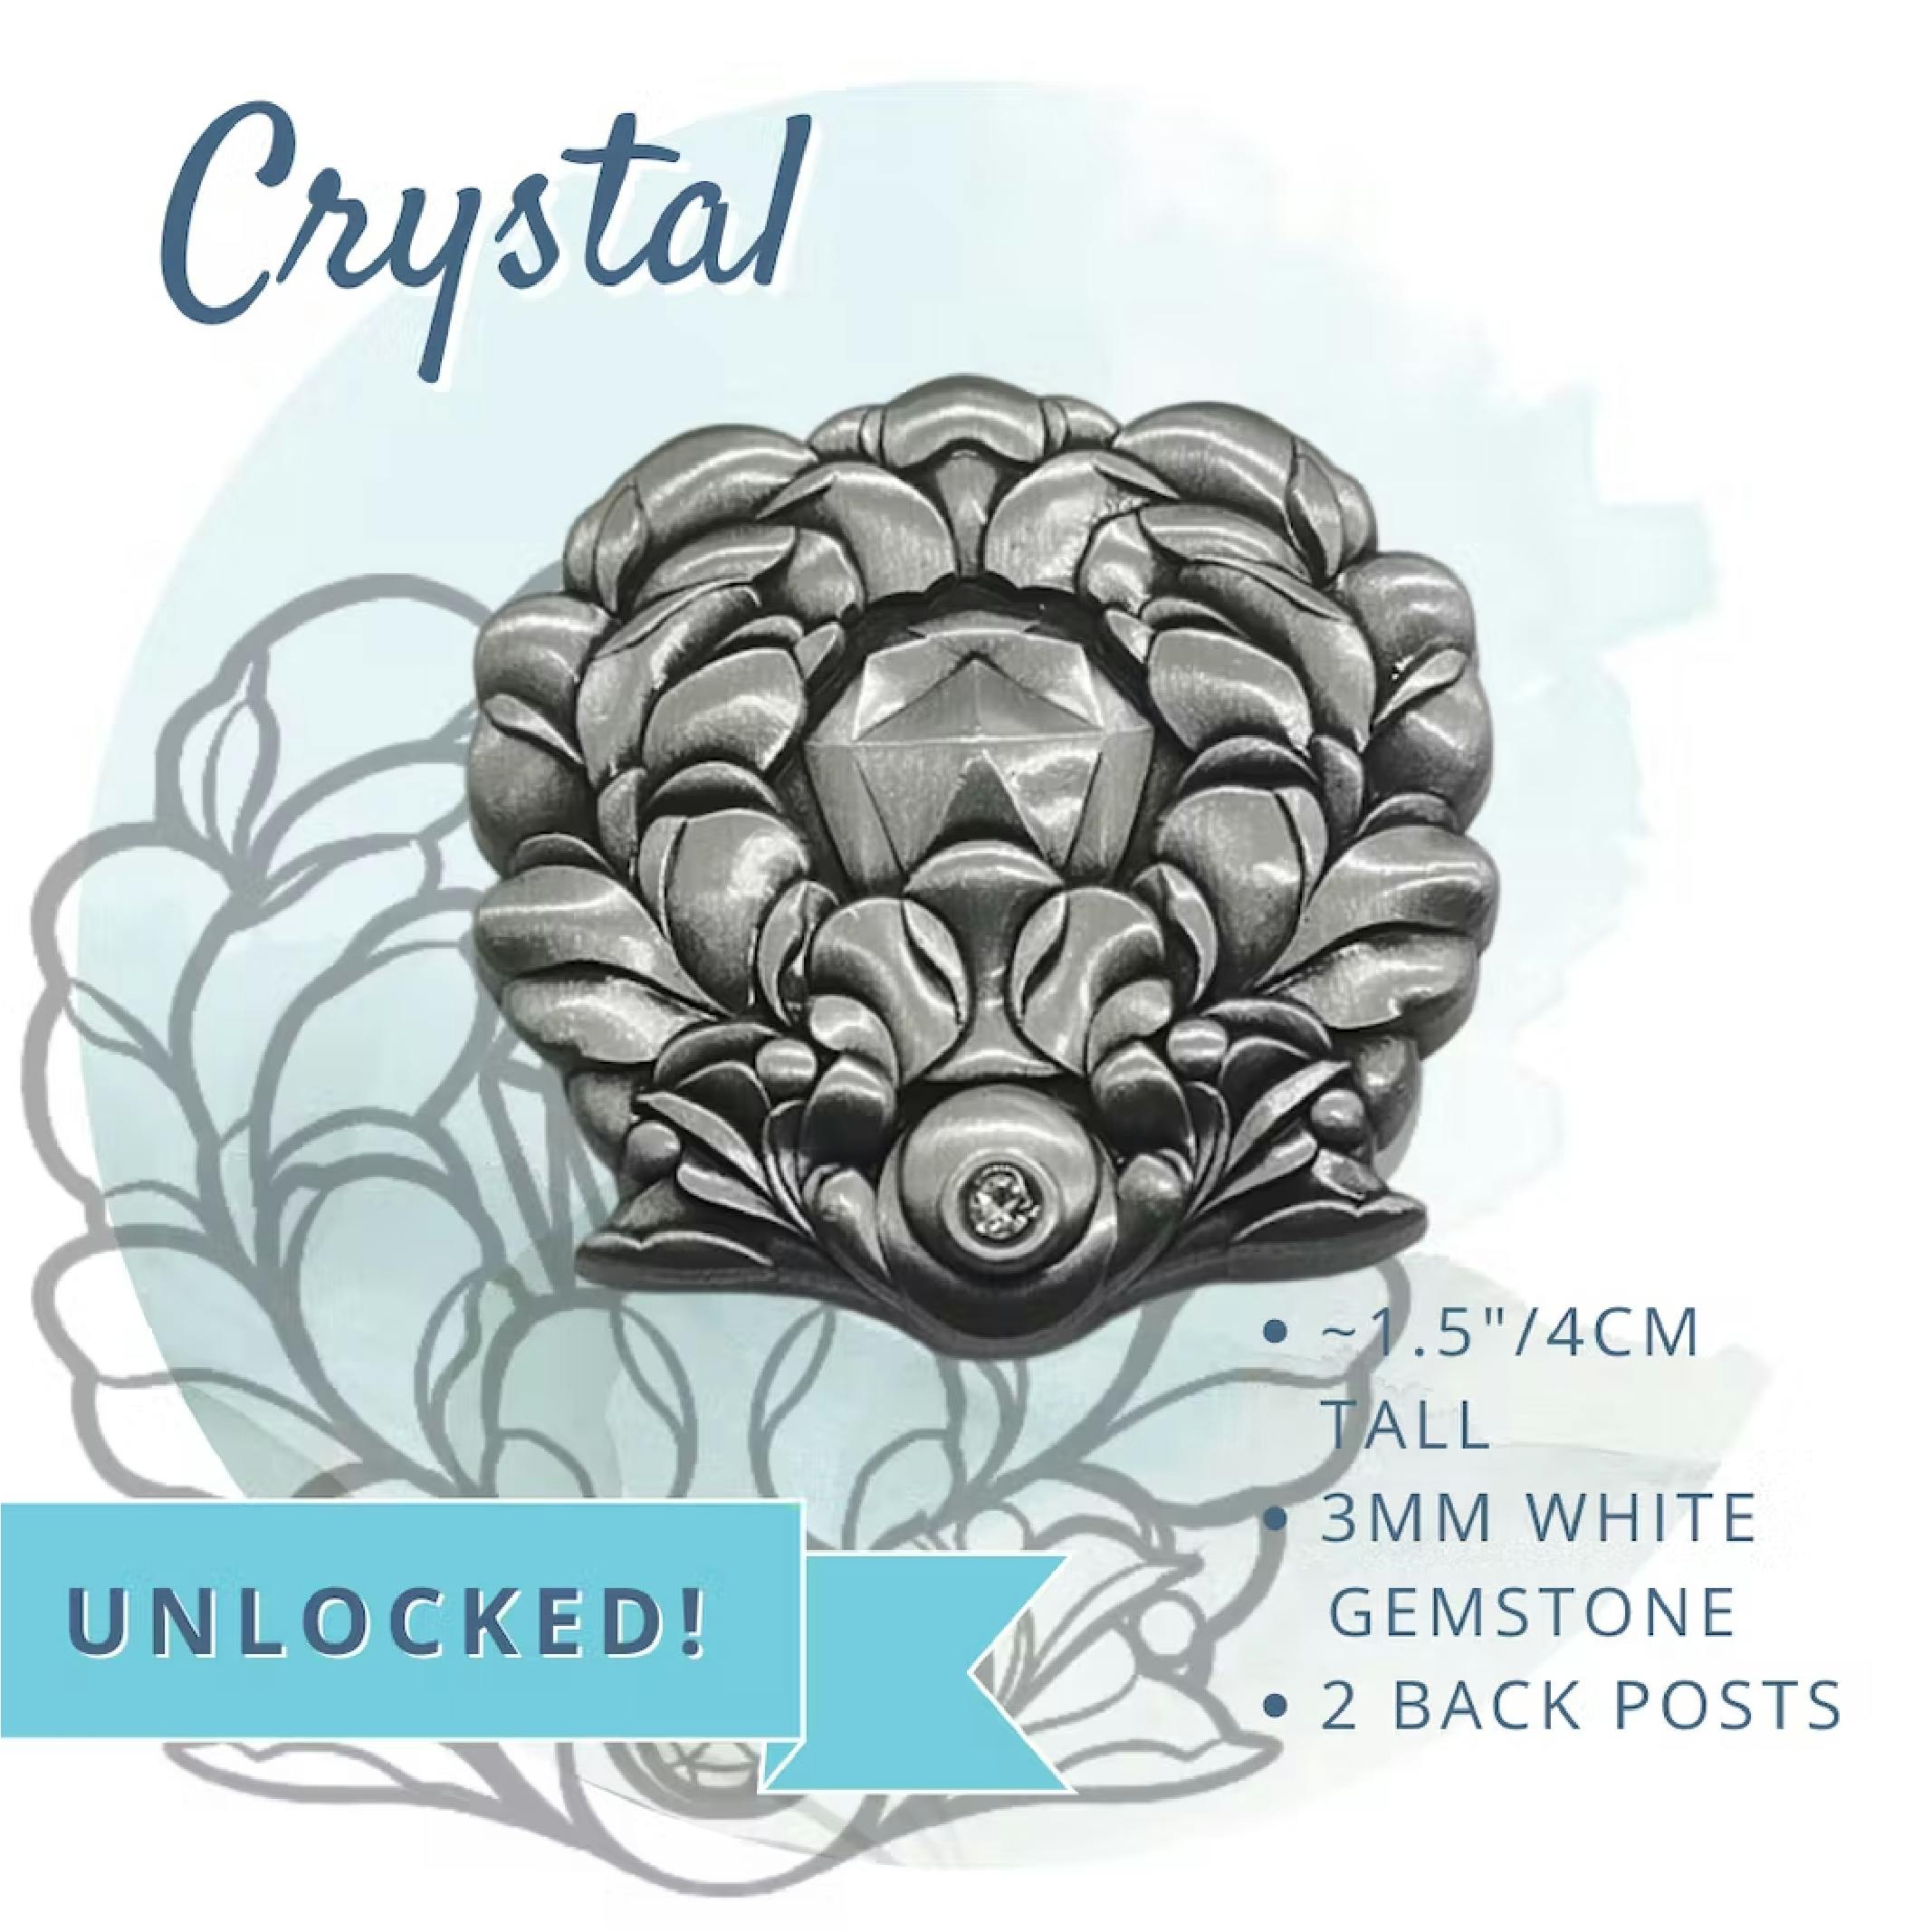 Special Pin: The Crystal Pin